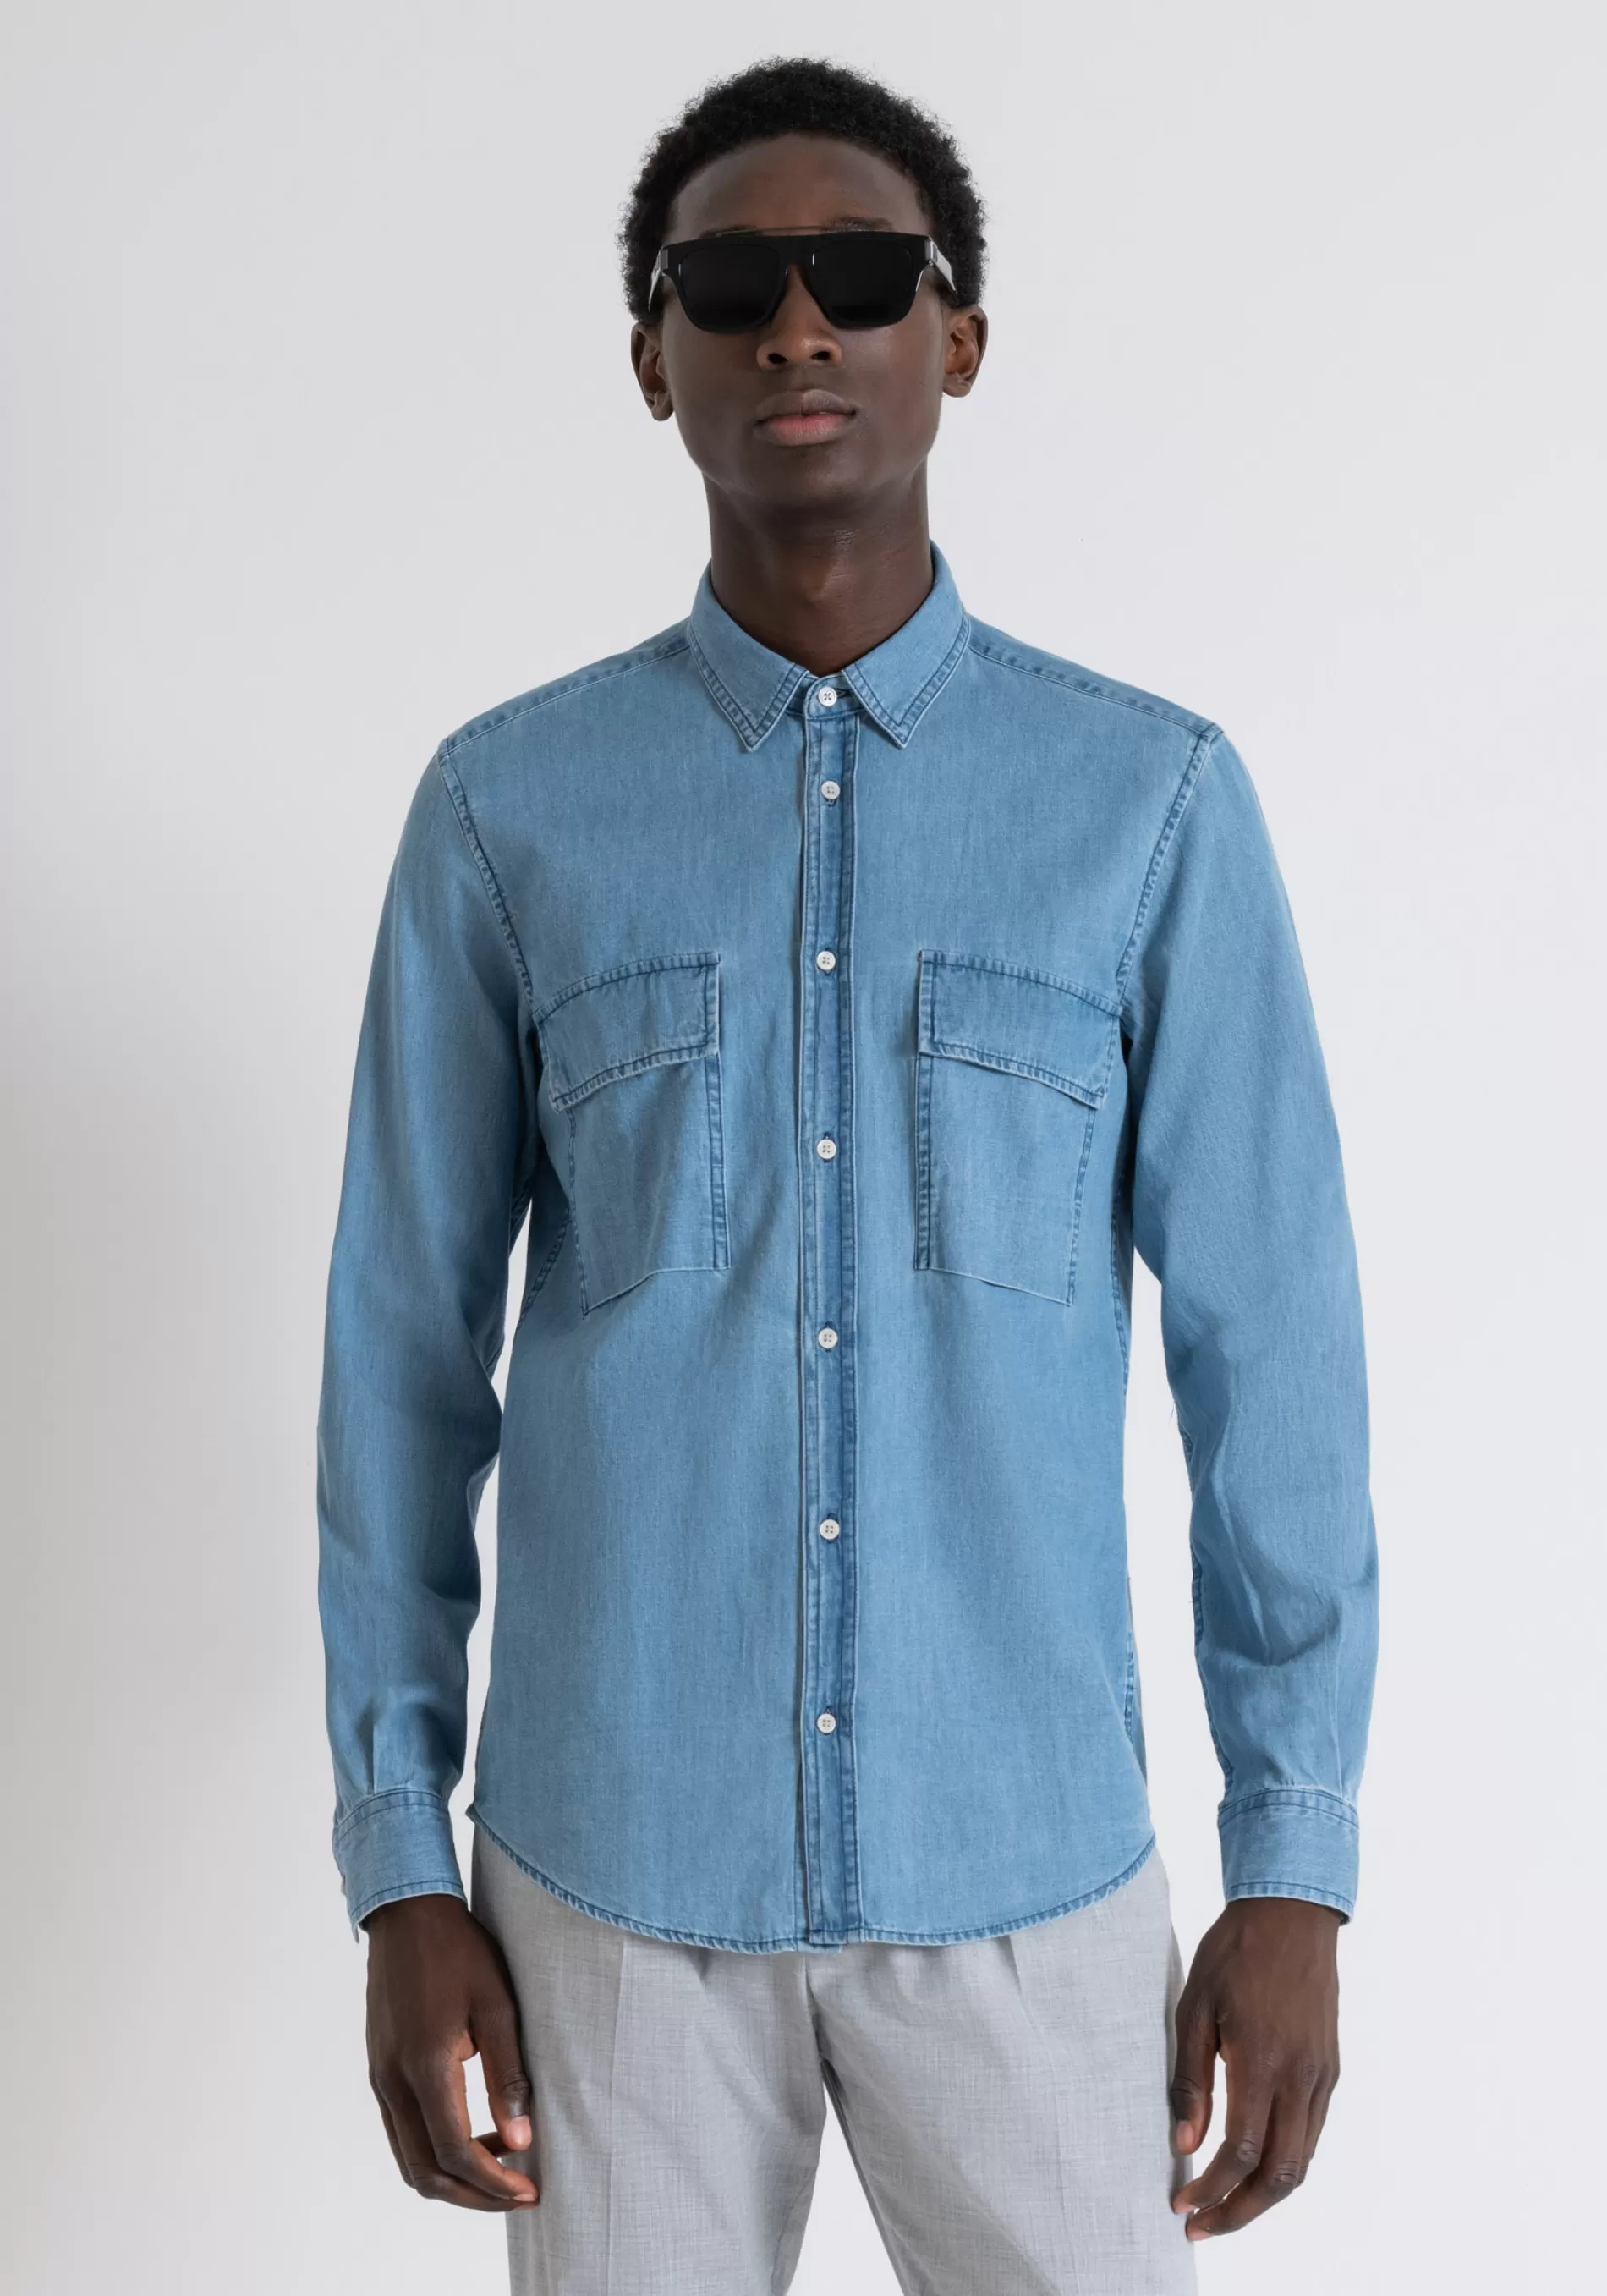 Best ISTANBUL REGULAR FIT SHIRT IN WASHED DENIM COTTON Shirts